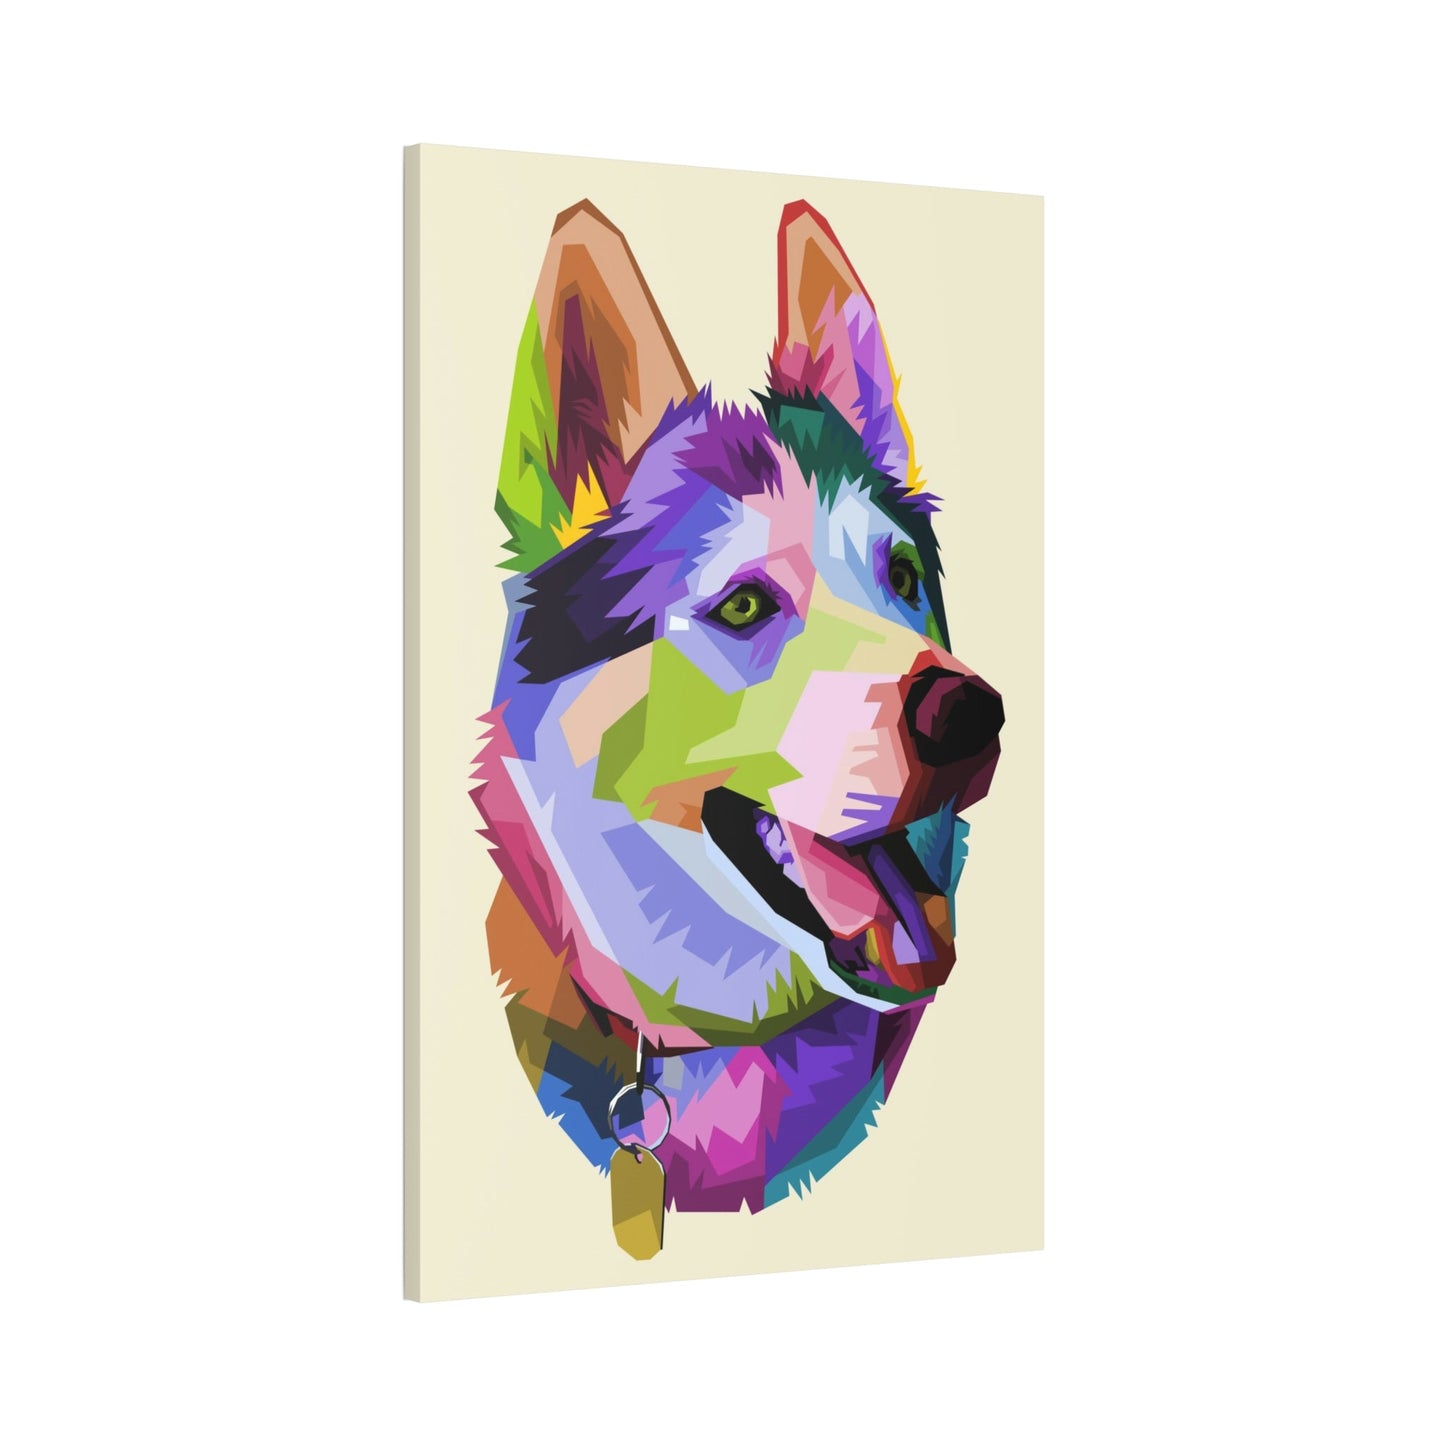 Loyal Companion: Natural Canvas & Poster Wall Art of a Devoted Dog